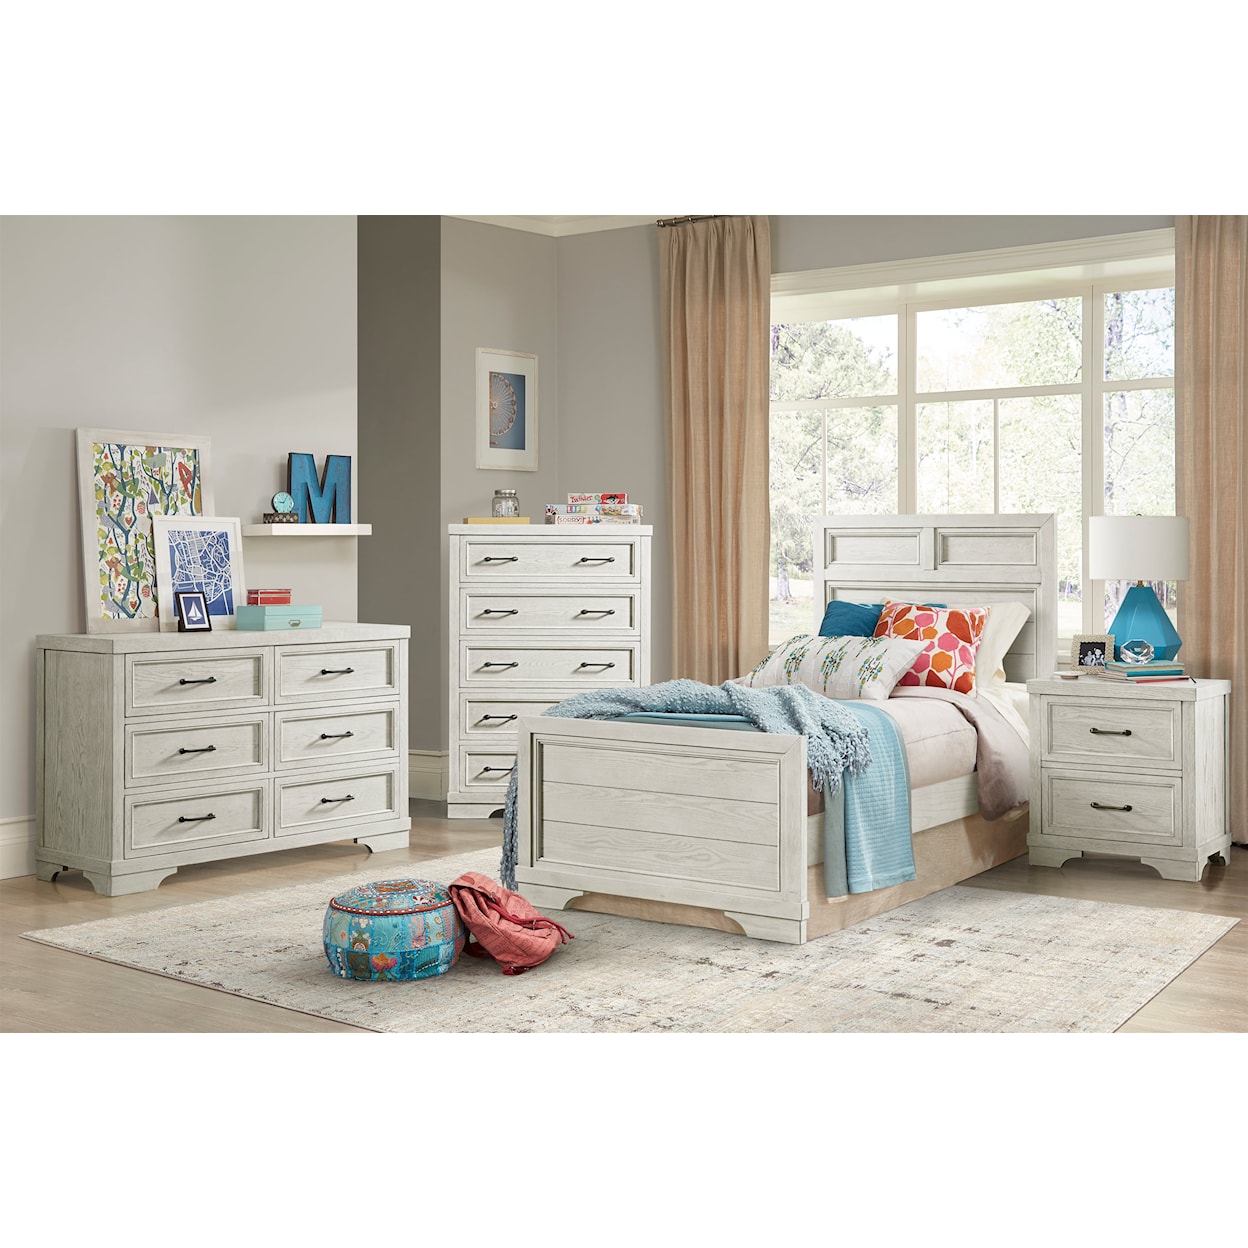 Westwood Design Foundry 5-Drawer Chest